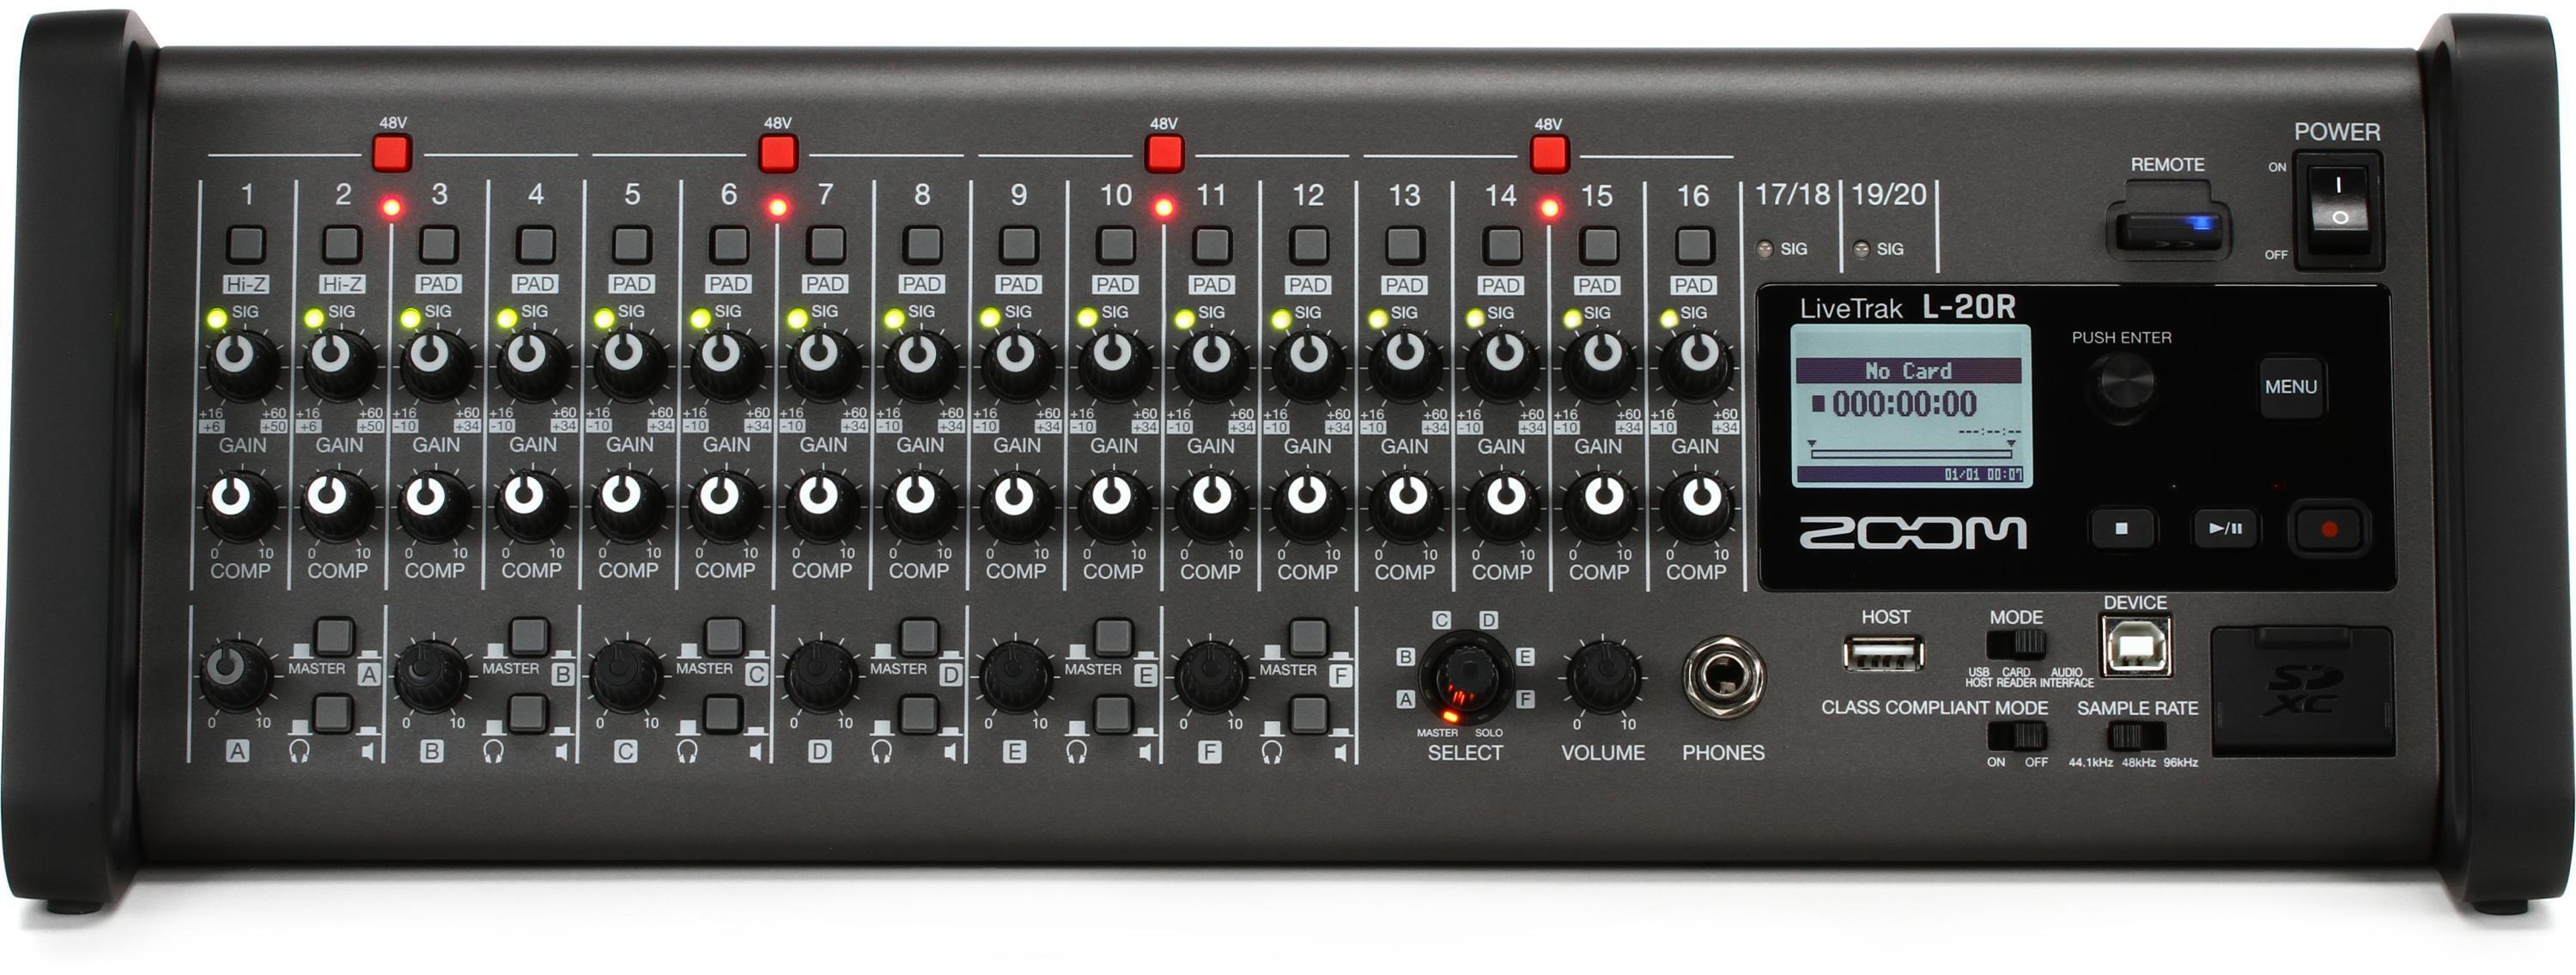 Zoom　Digital　20-channel　Recorder　Reviews　LiveTrak　Mixer　Remote-controlled　L-20R　Sweetwater